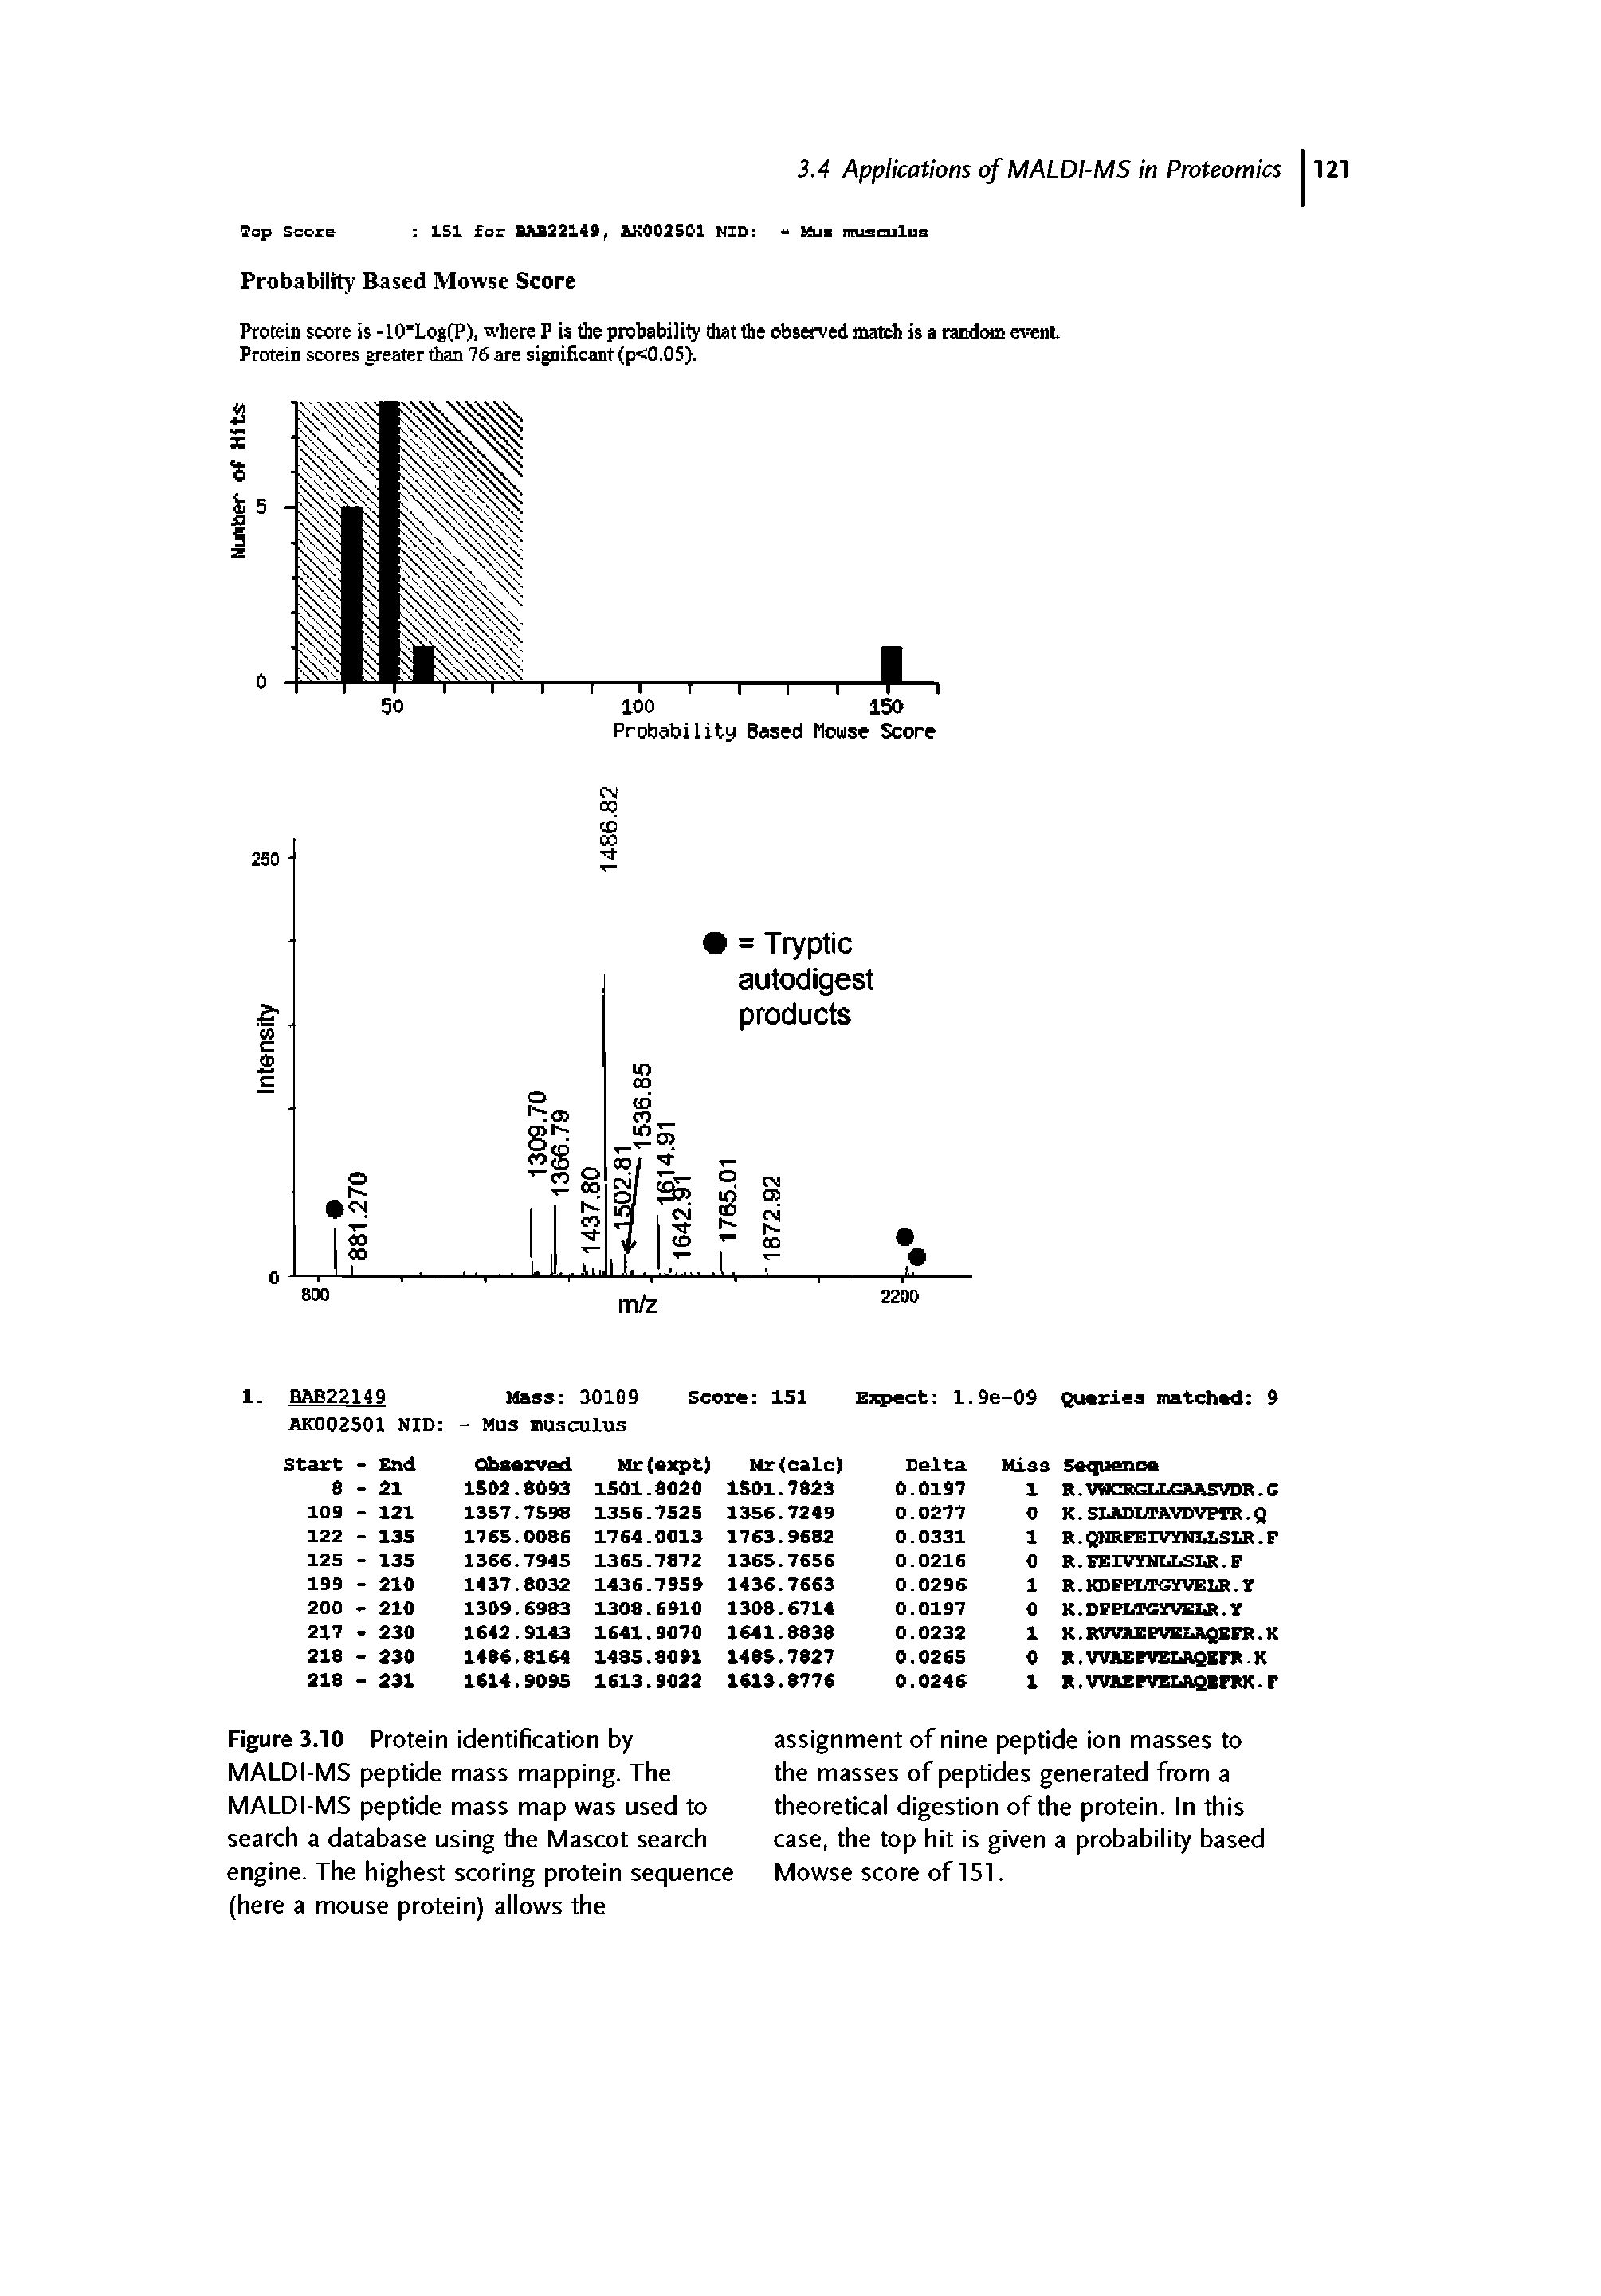 Figure 3.10 Protein identification by MALDI-MS peptide mass mapping. The MALDI-MS peptide mass map was used to search a database using the Mascot search engine. The highest scoring protein sequence (here a mouse protein) allows the...